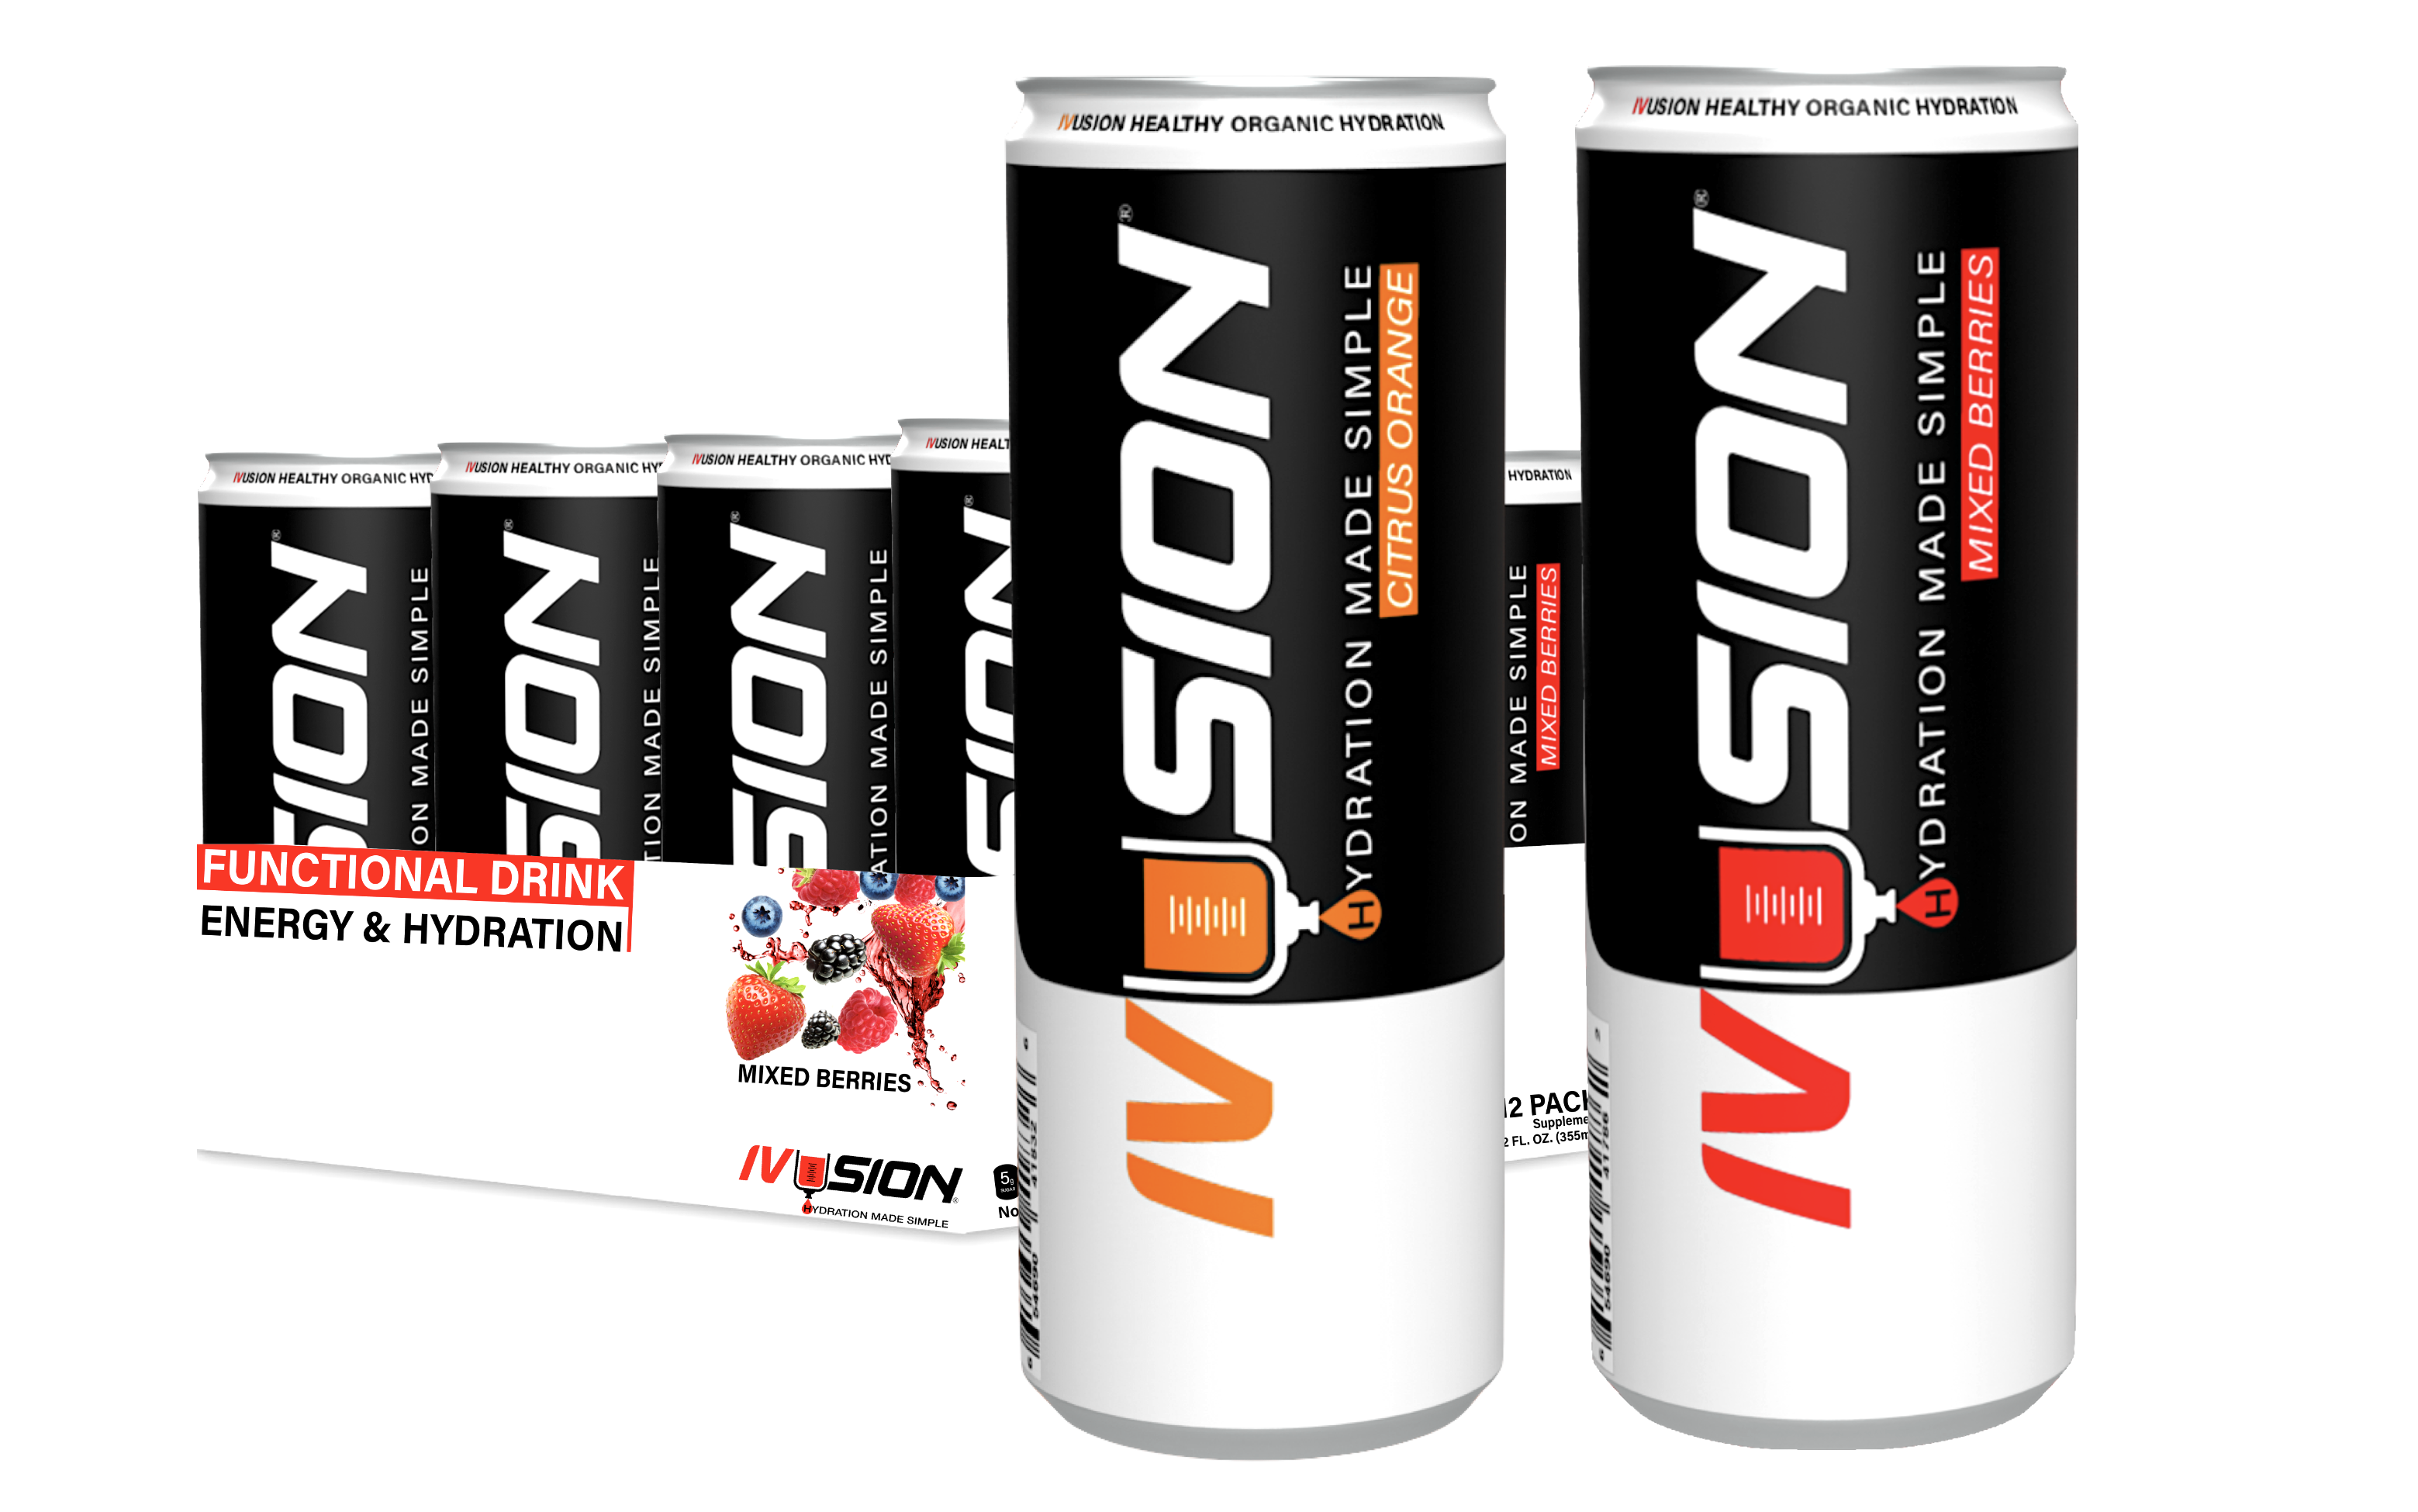 Best hangover drink and recovery drink. IV fluids hangover recovery. IVUSION Hydration